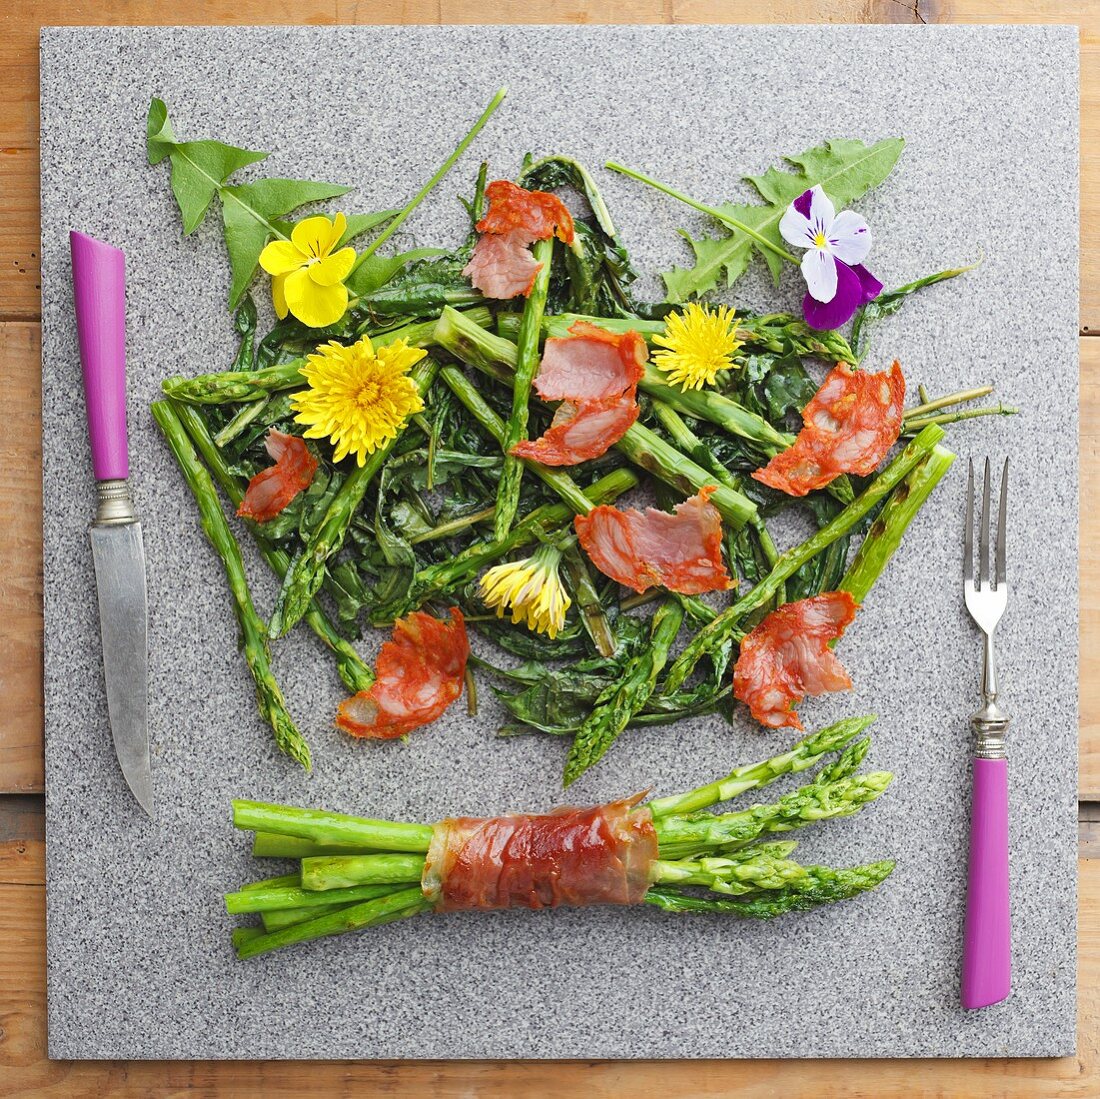 Roasted green asparagus with parma ham and edible flowers